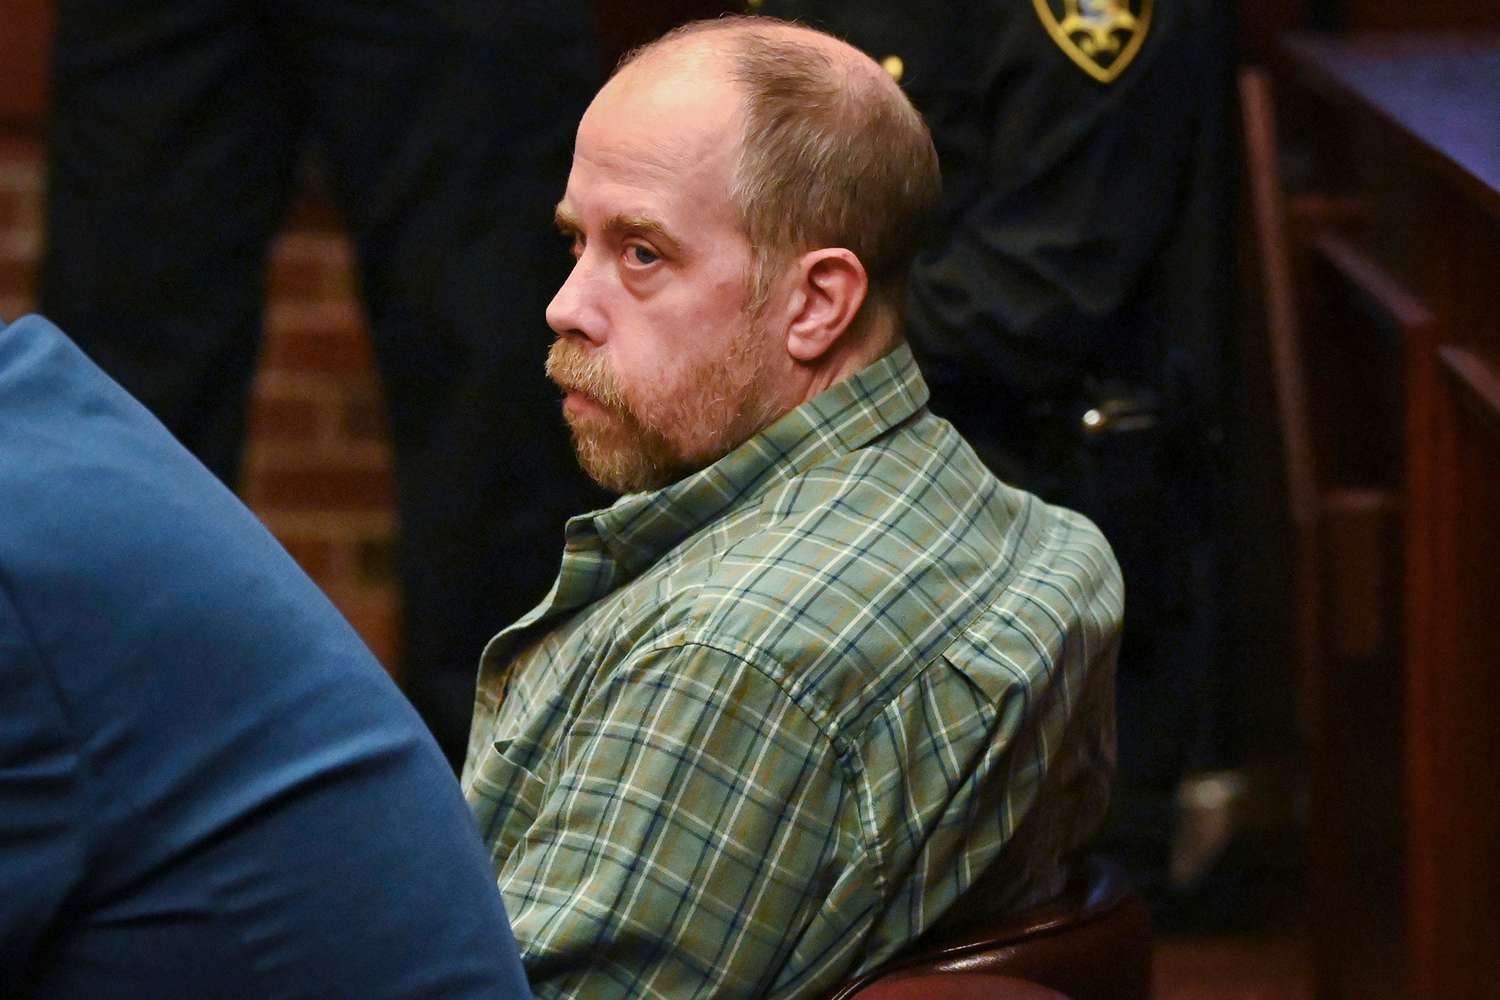 Craig Ross Jr. Sentenced to Prison for Kidnapping Girl from Upstate N.Y. Park [Video]